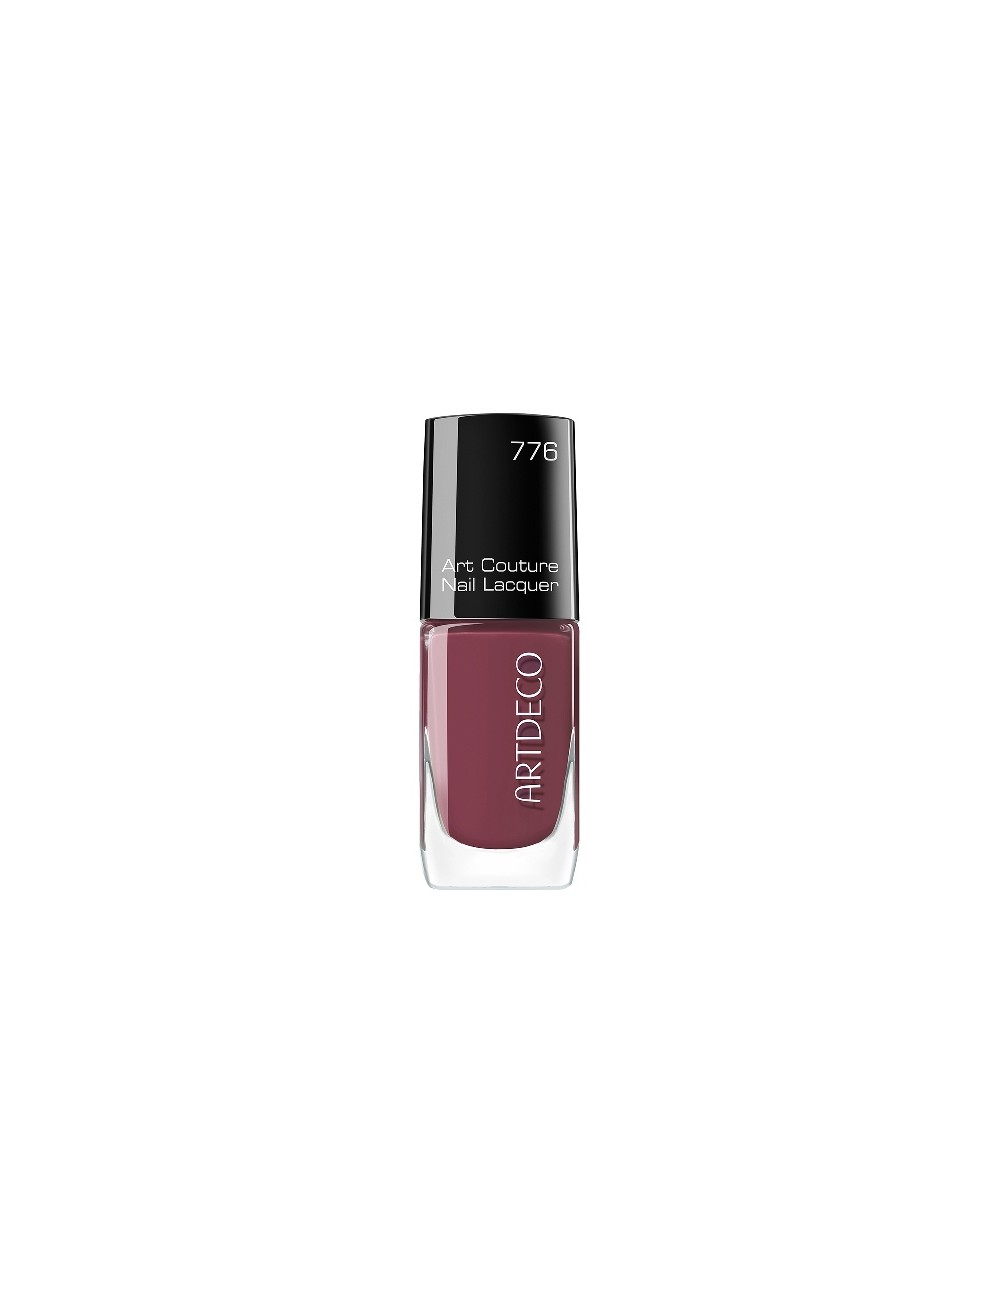 ART COUTURE vernis à ongles 776-red oxide 10 ml NE112076